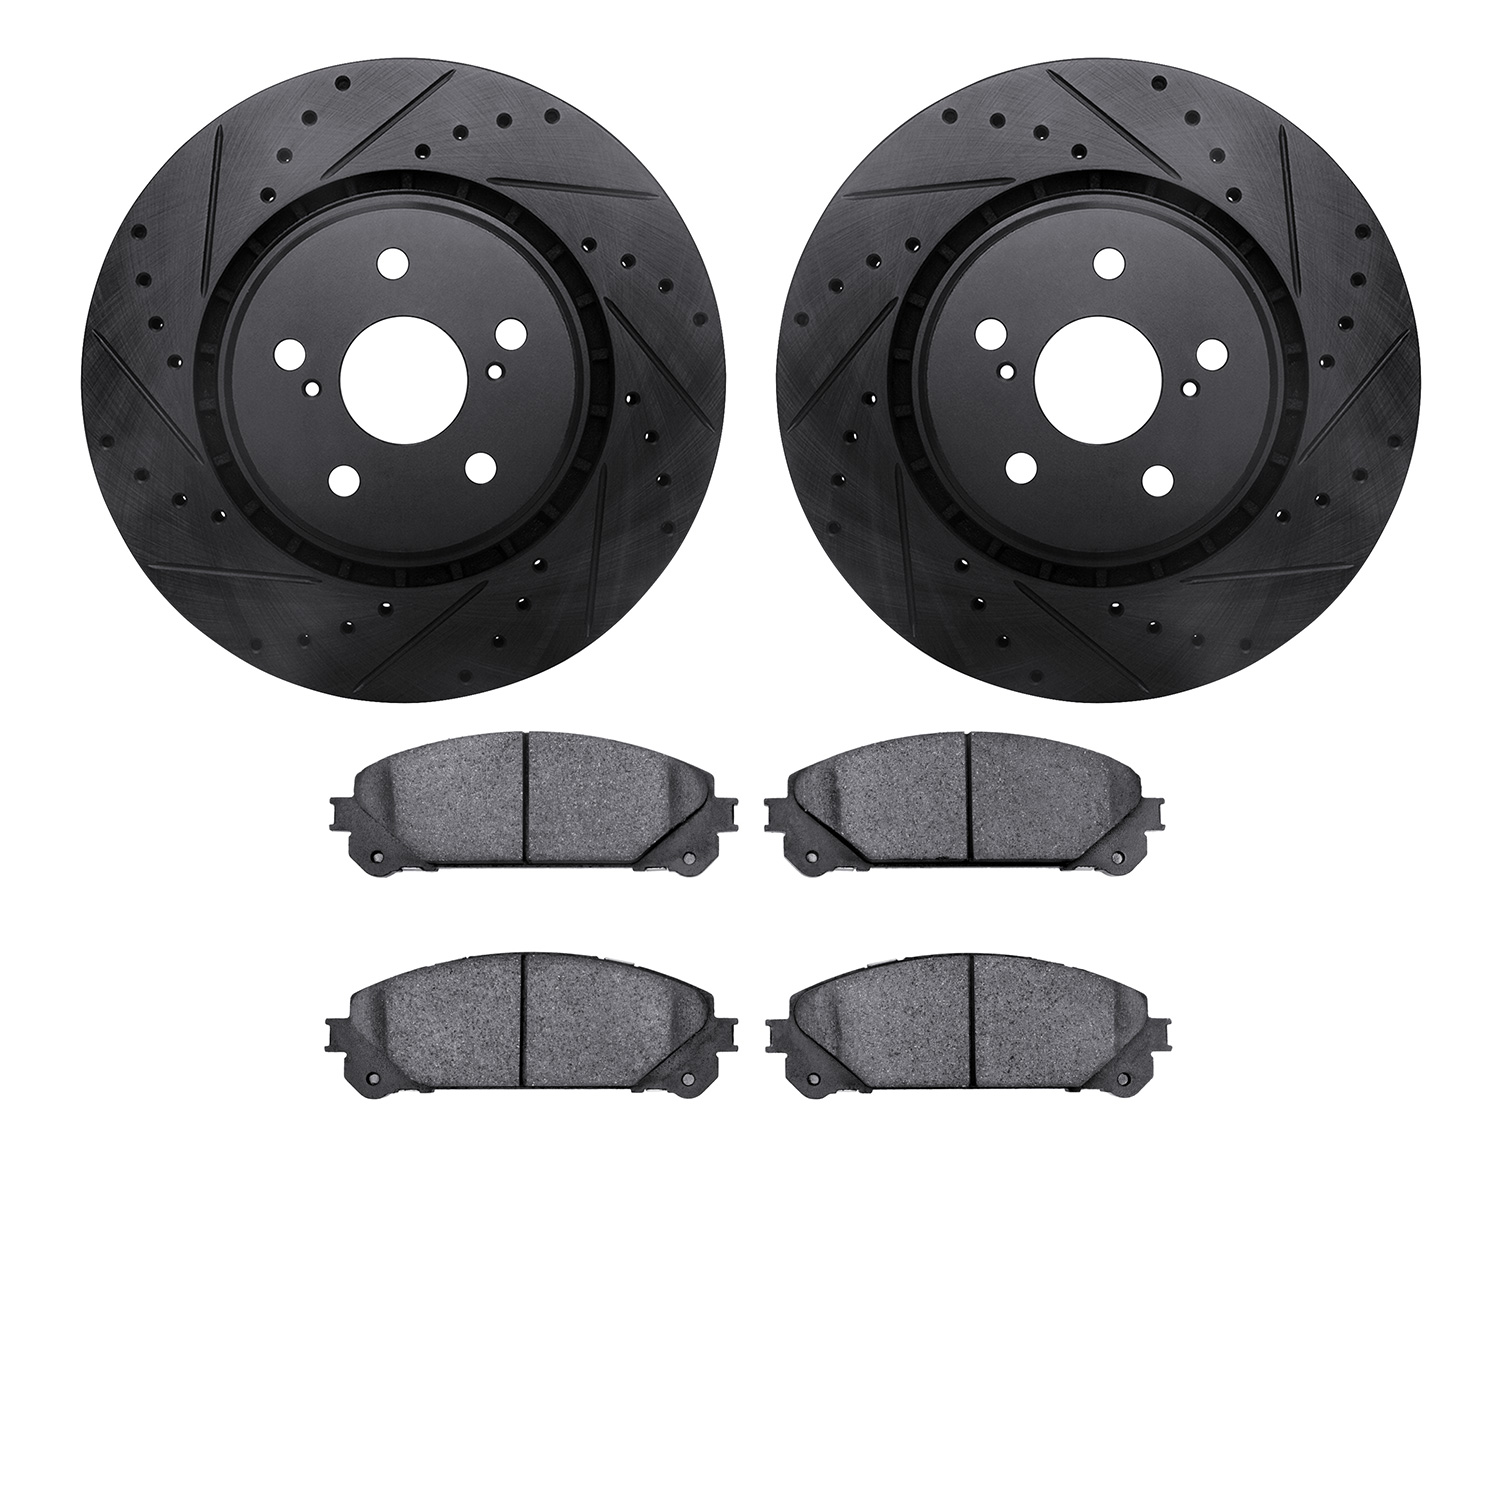 8302-75029 Drilled/Slotted Brake Rotors with 3000-Series Ceramic Brake Pads Kit [Black], Fits Select Lexus/Toyota/Scion, Positio